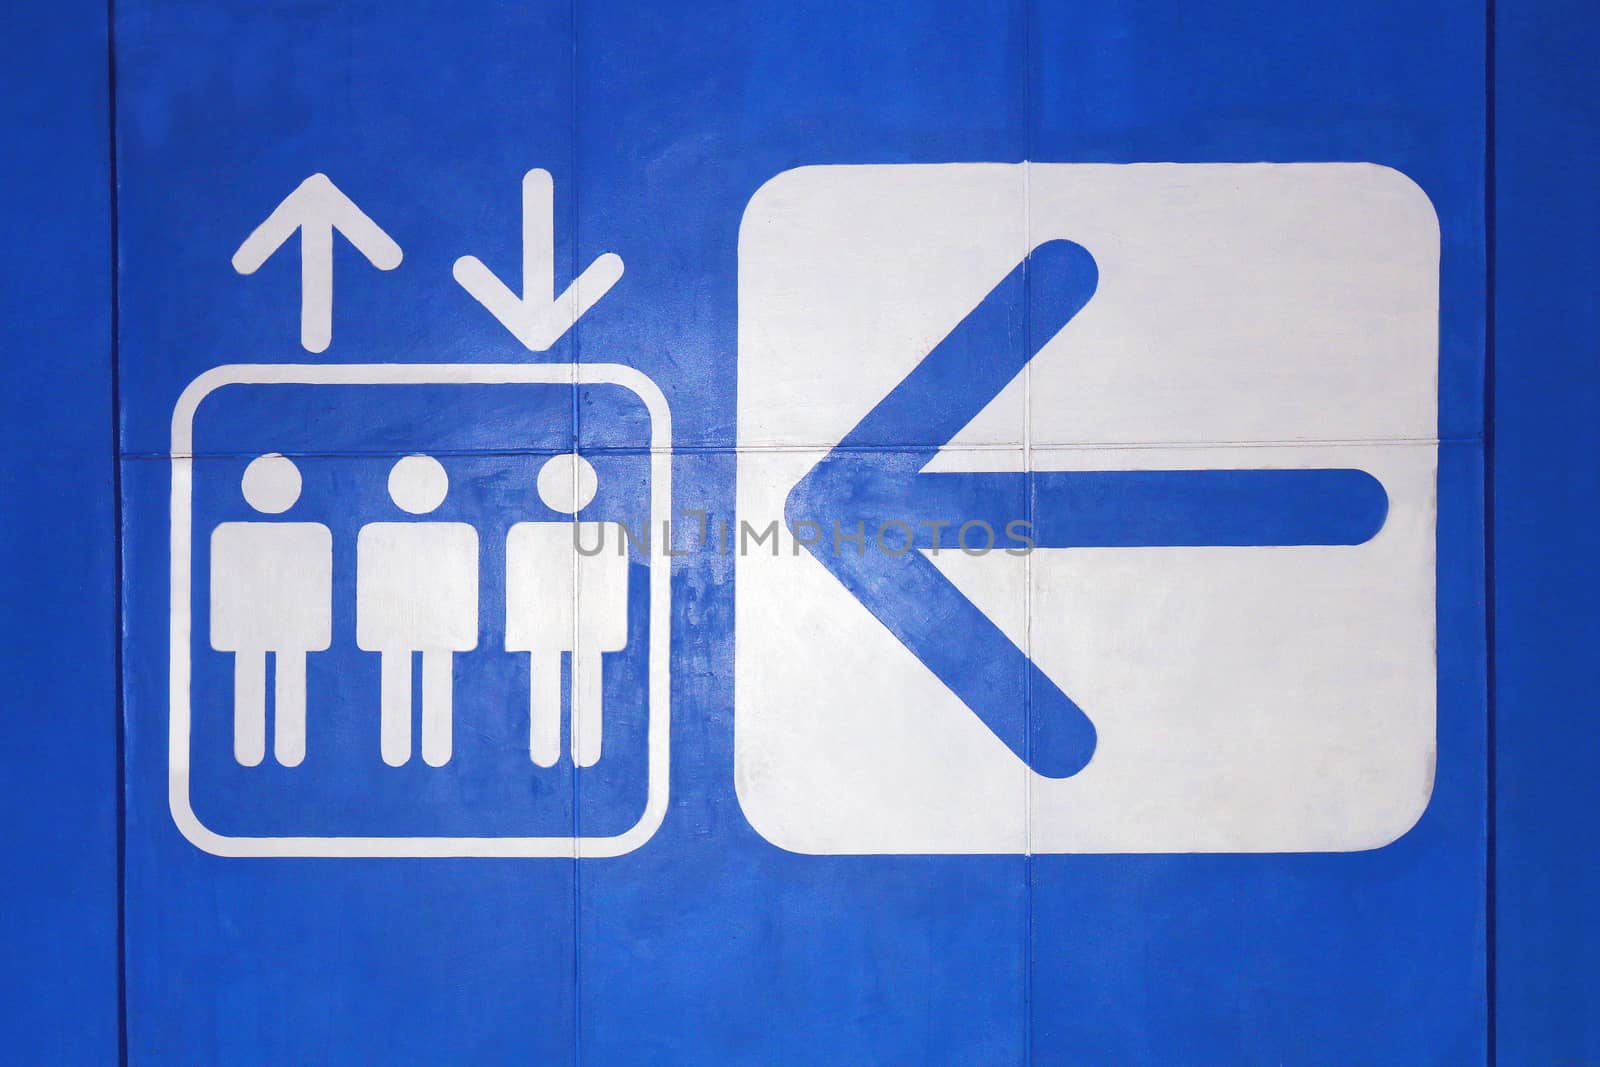 Elevator icon sign White Arrow symbol lift on blue background, Elevator symbol Concept Warning information sign Flat style on concrete wall blue